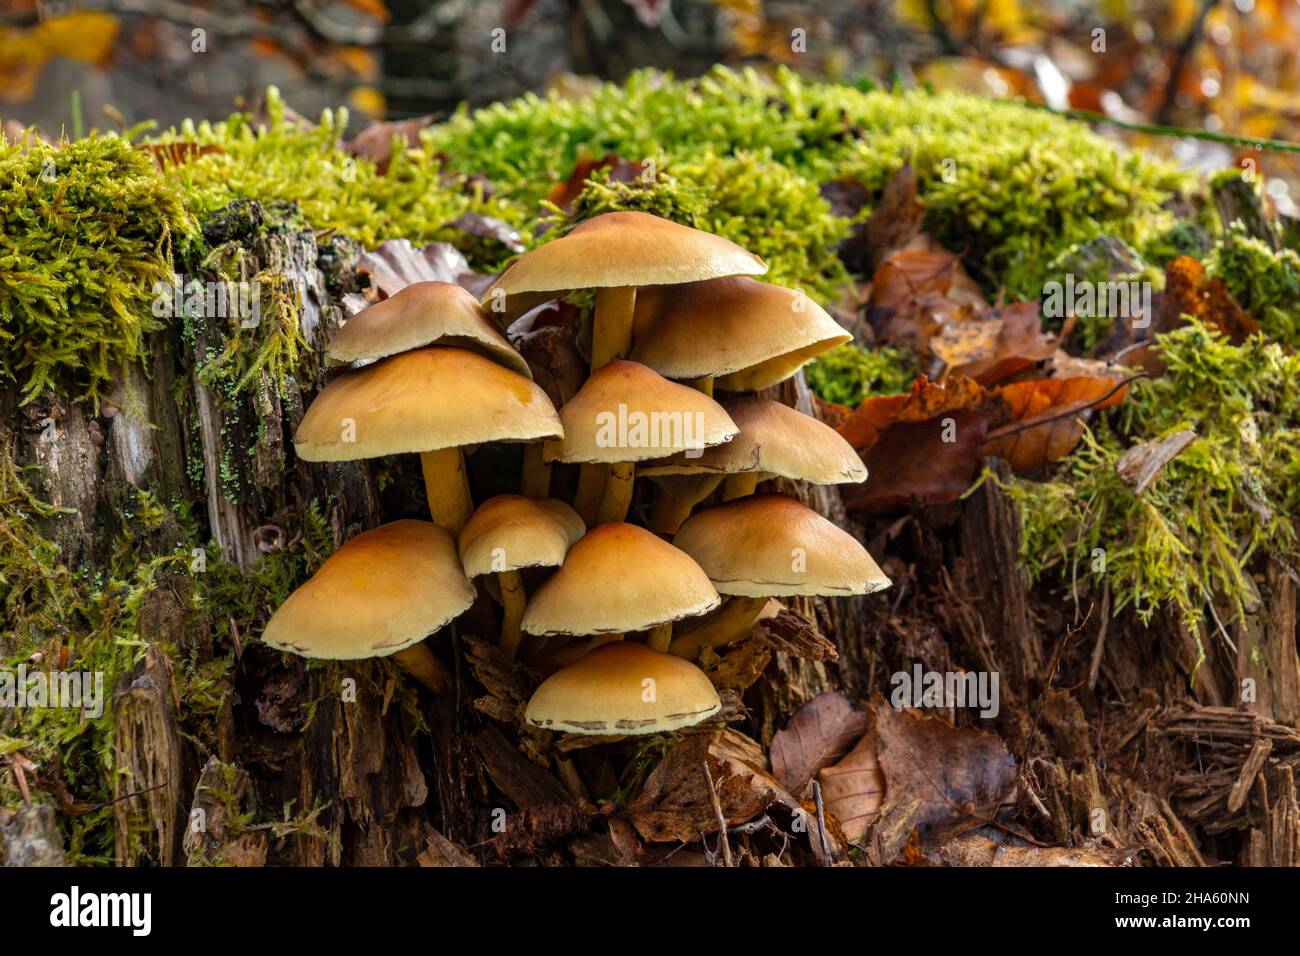 the conifer tuft is a type of mushroom from the family of traulle relatives. it mostly grows on coniferous wood,baden-württemberg,germany Stock Photo